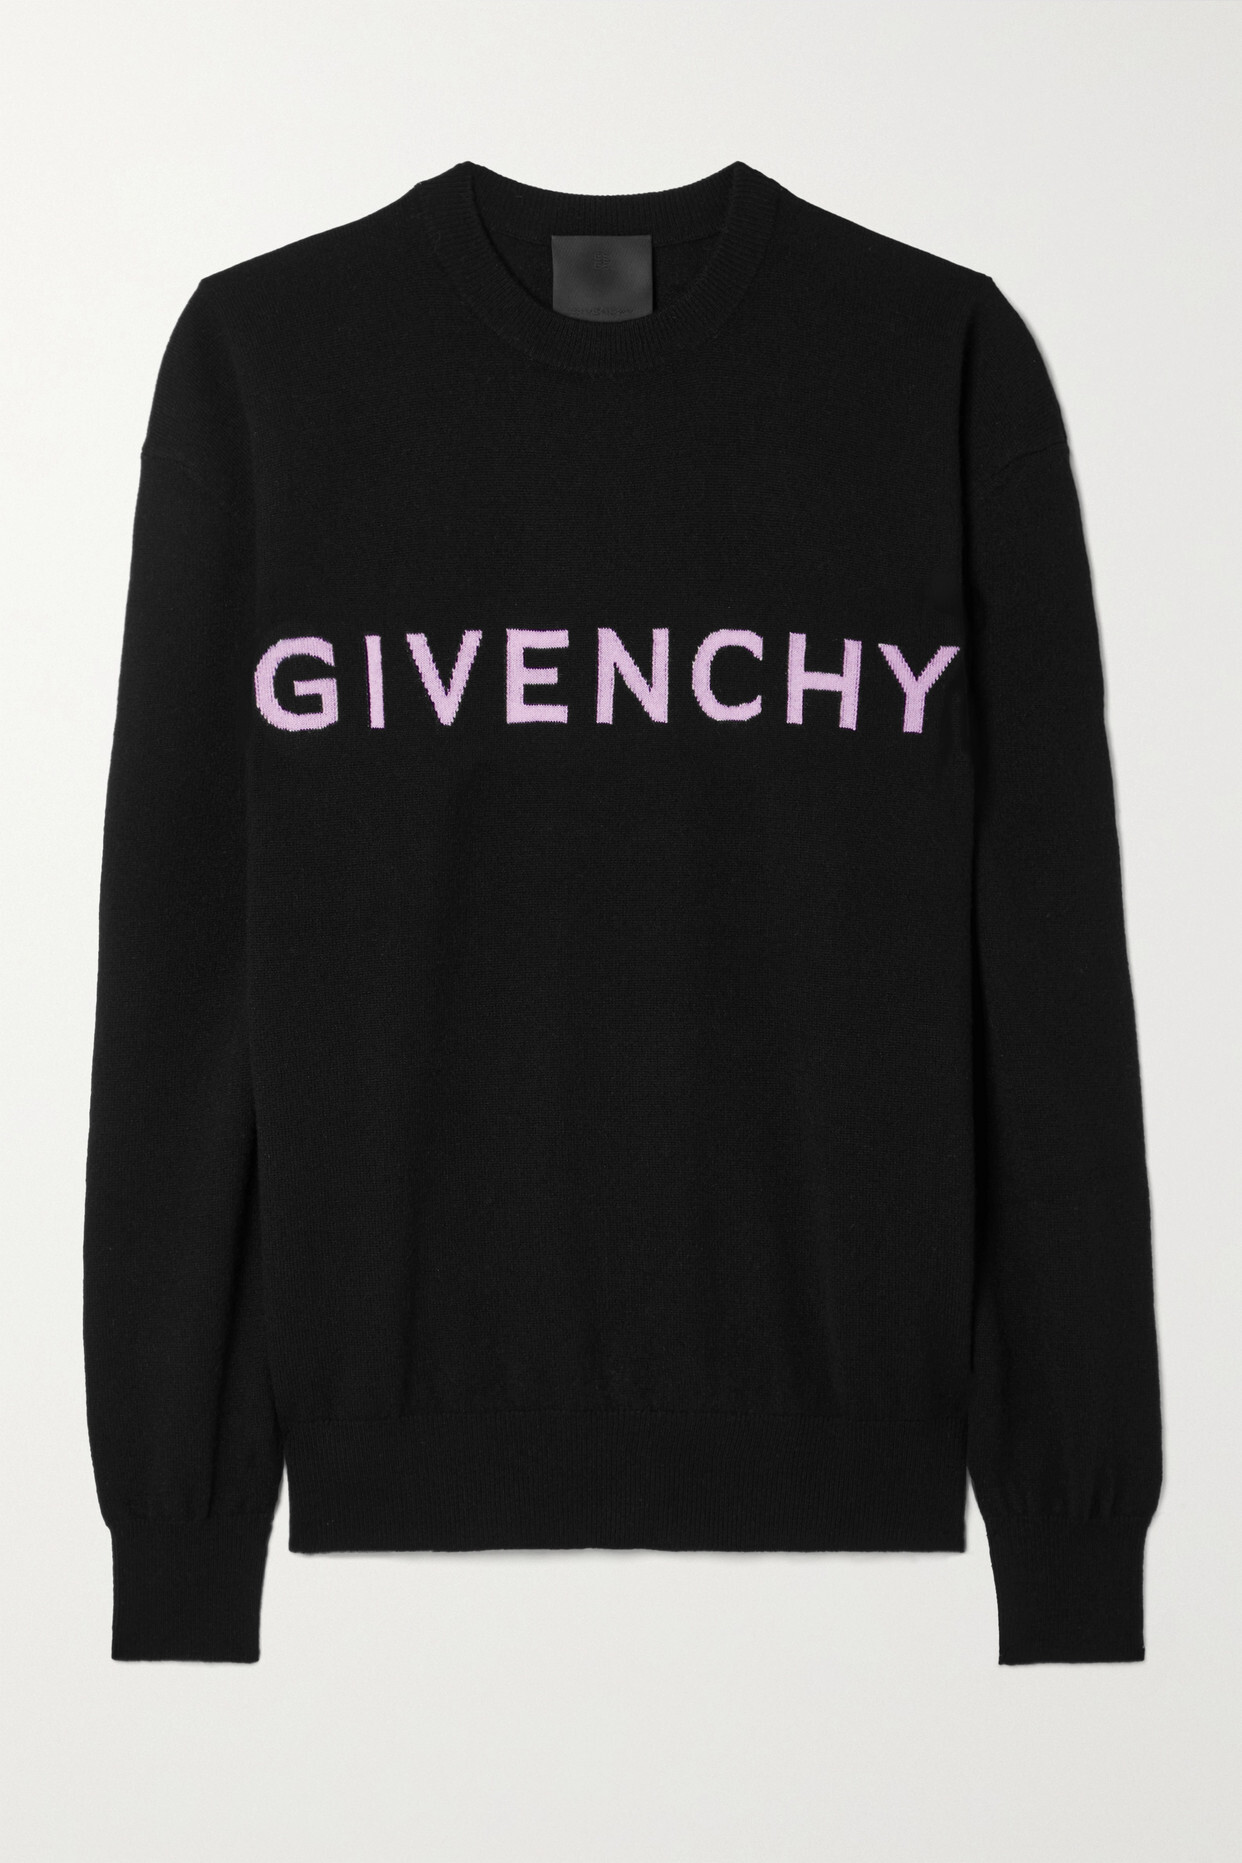 Givenchy - Intarsia Cashmere Sweater - Black